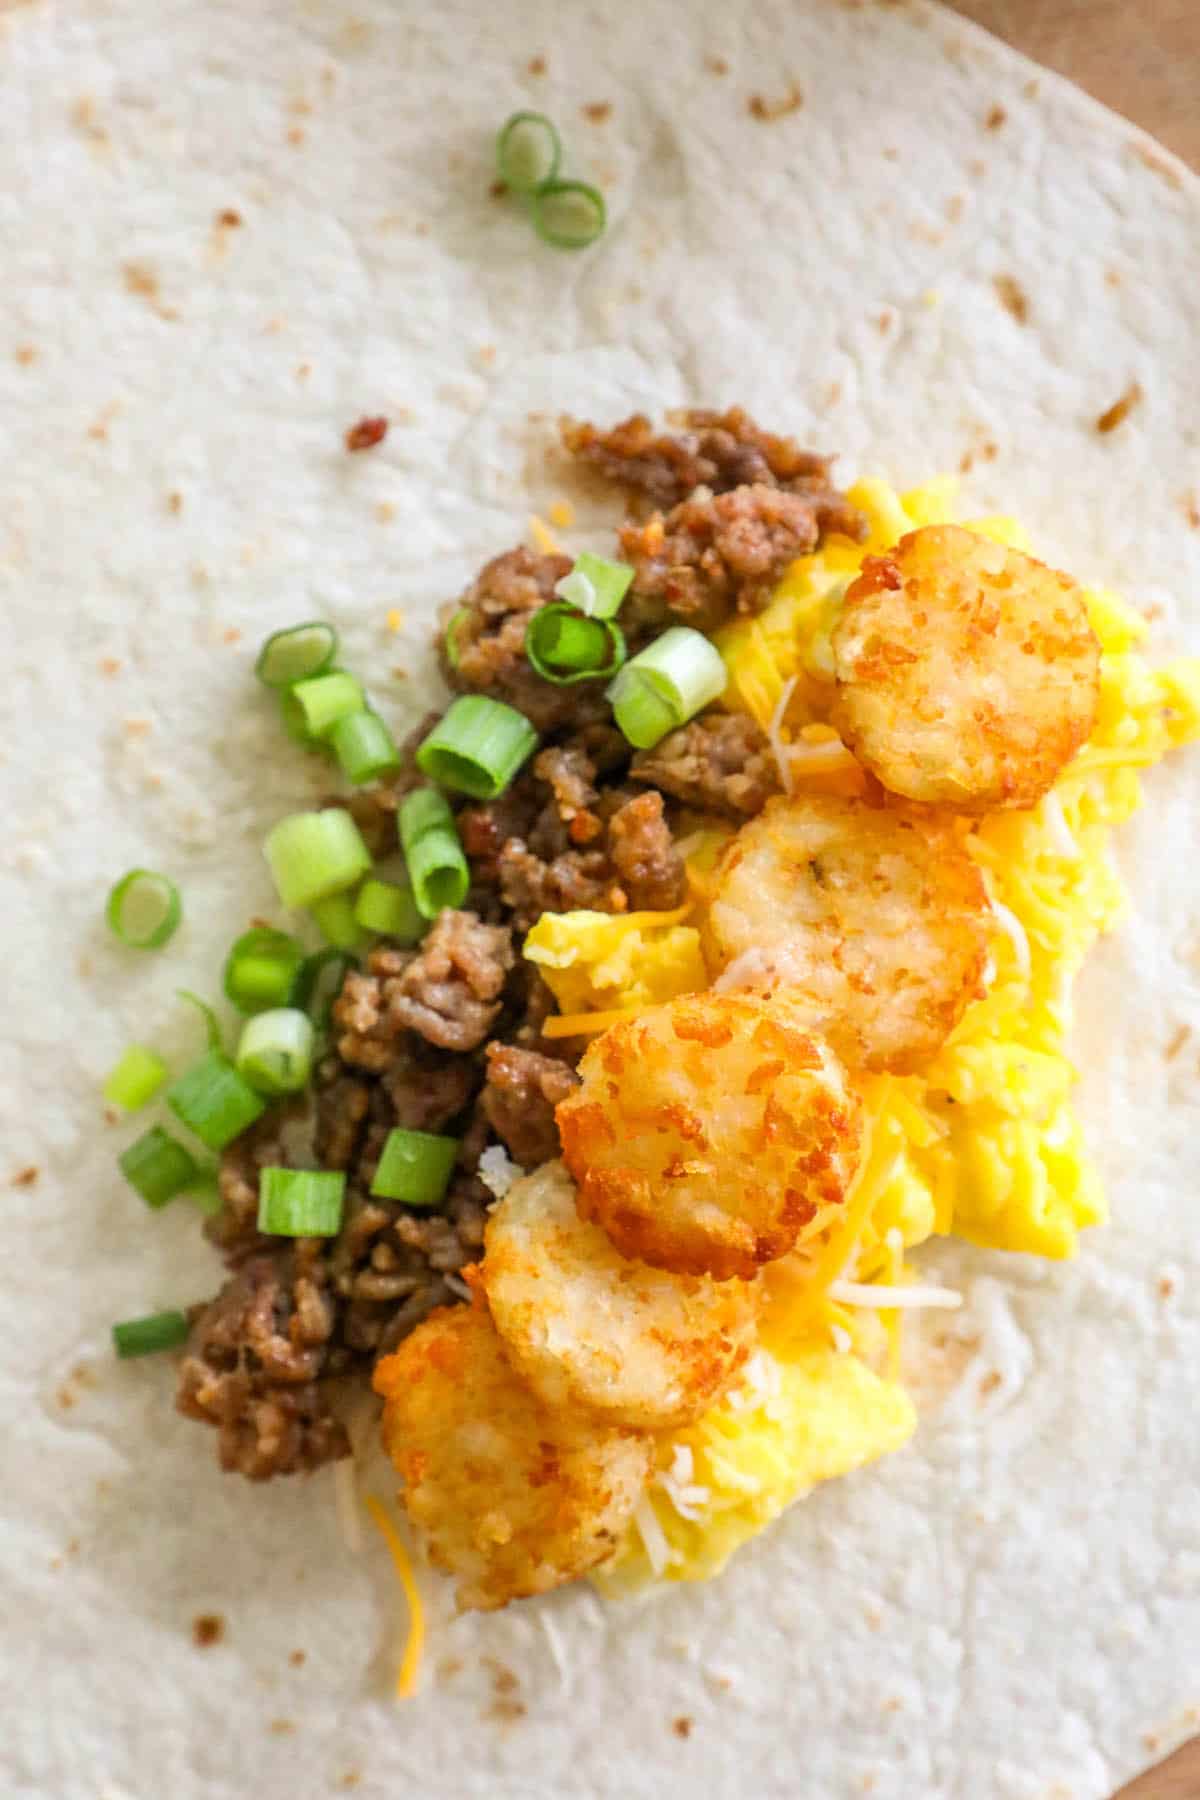 Freezer breakfast burrito with eggs and cheese.